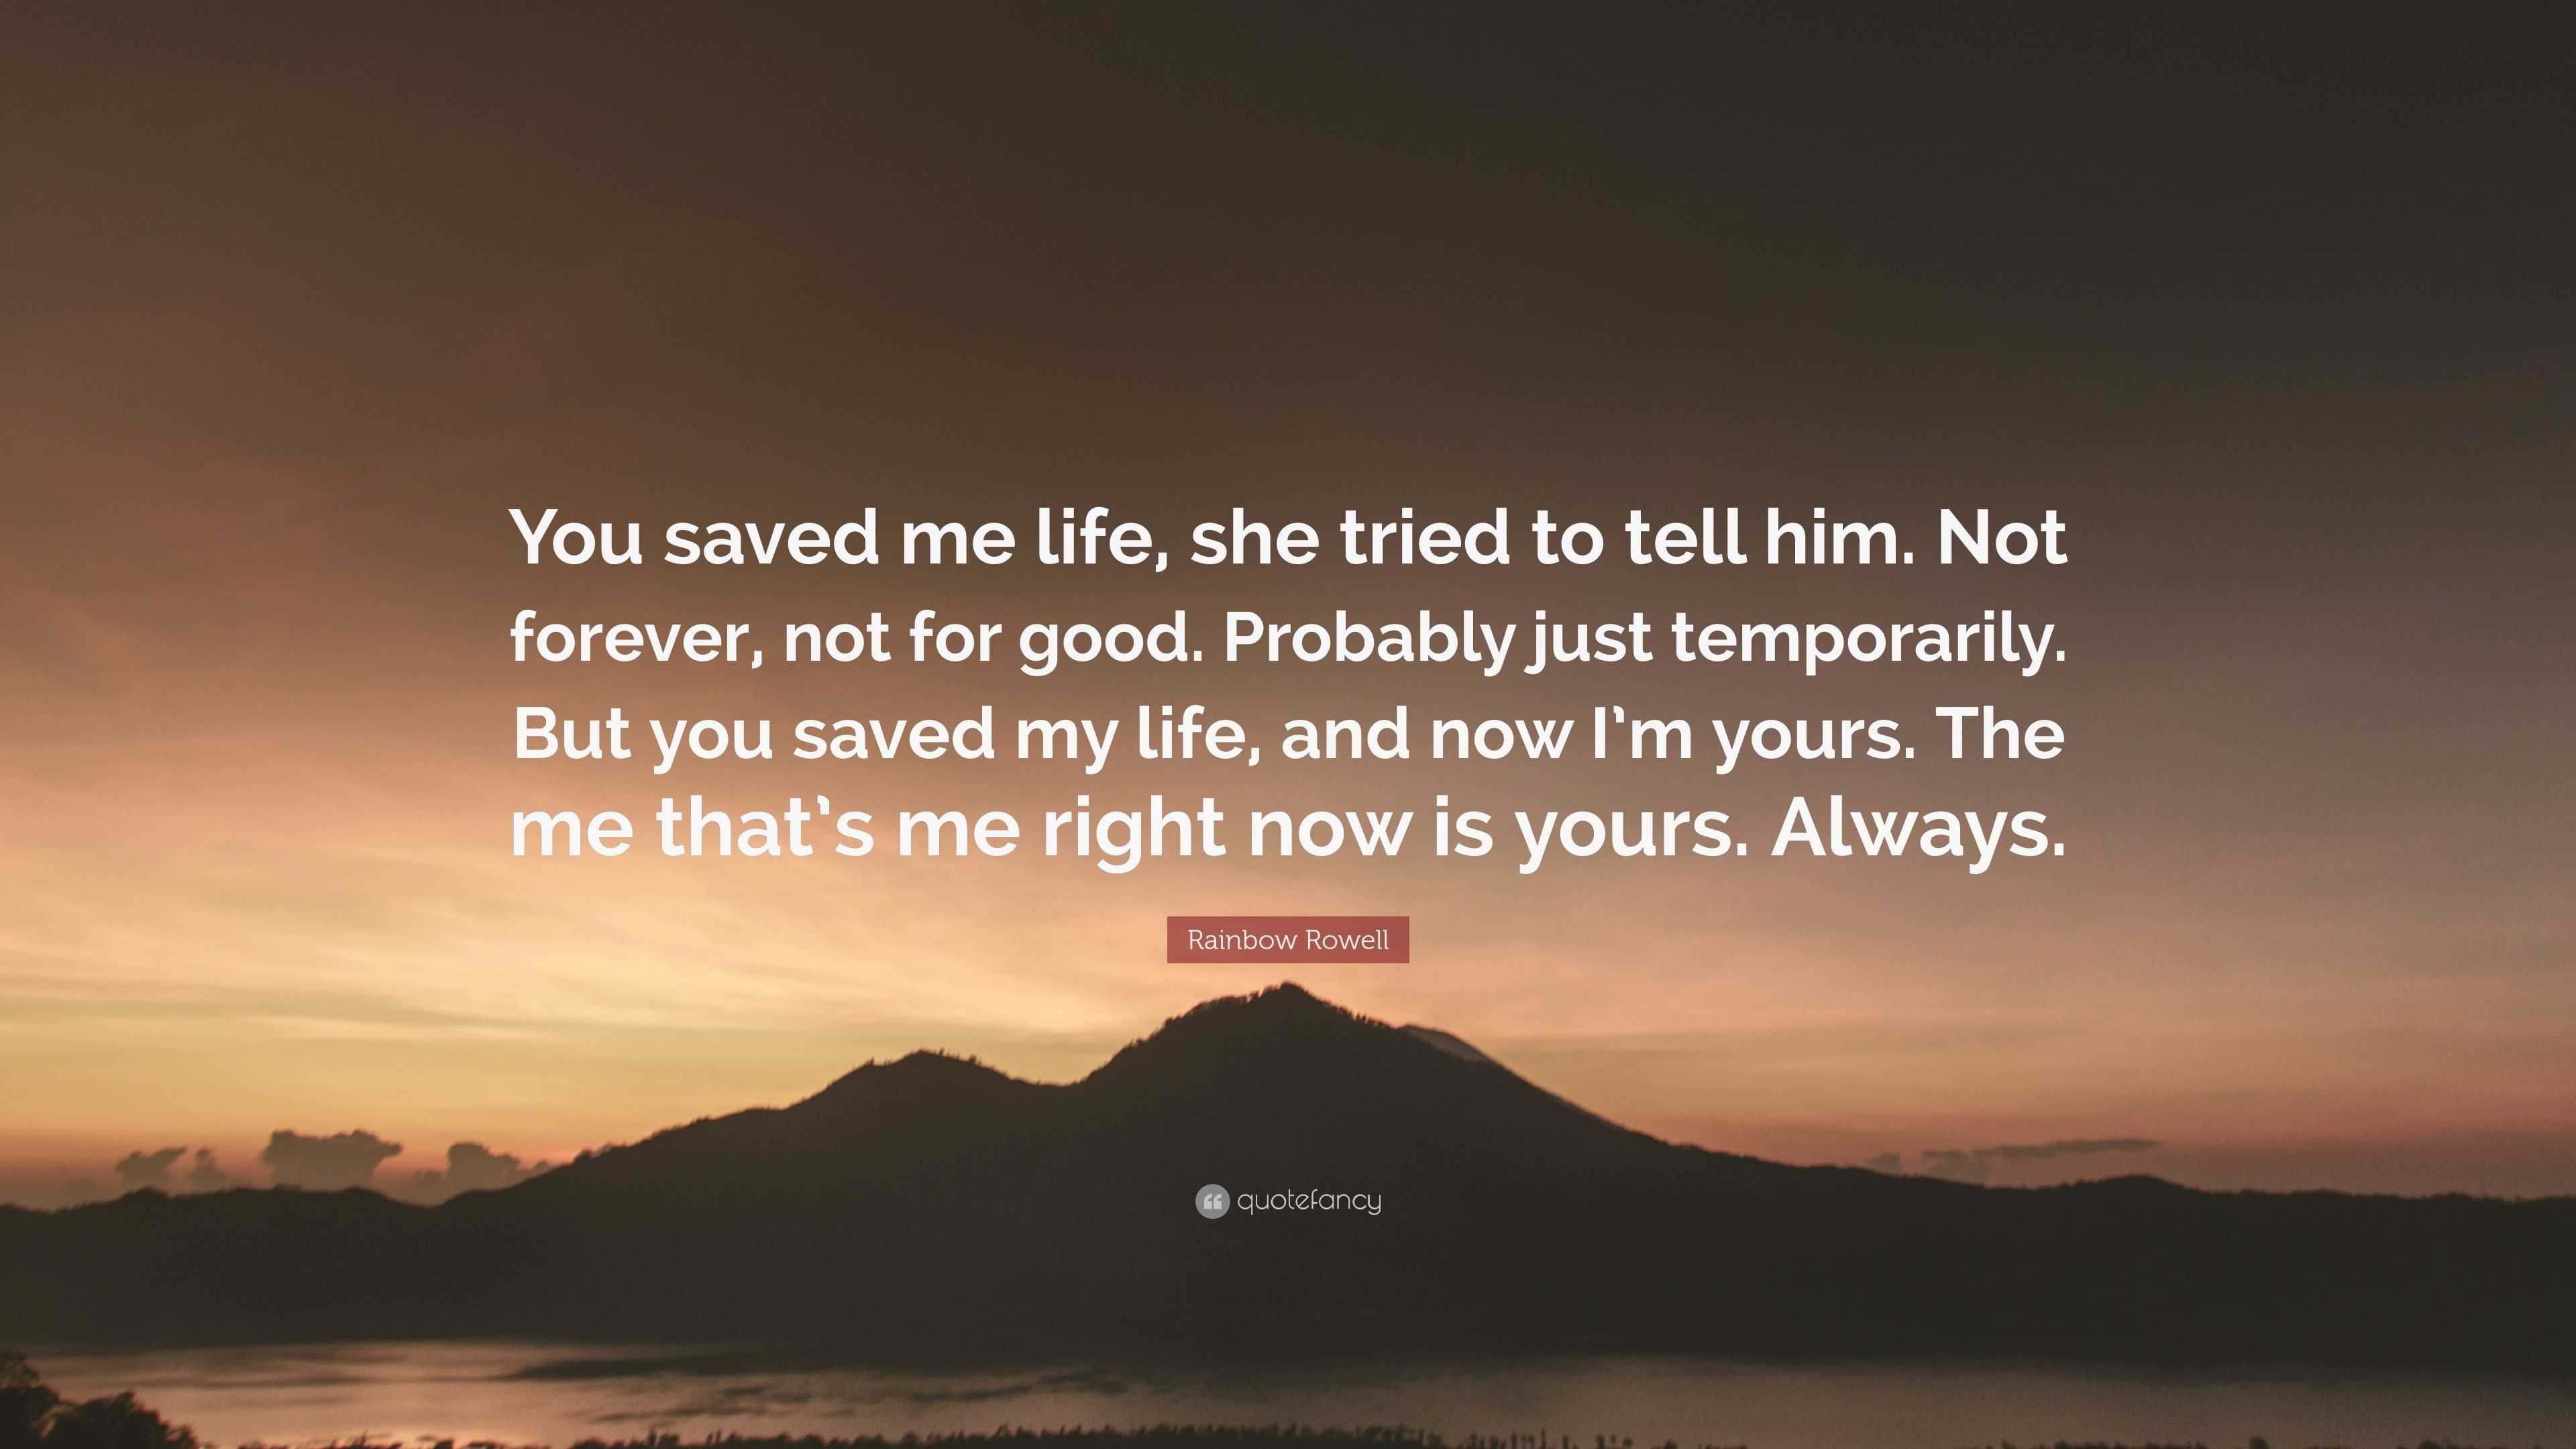 Rainbow Rowell Quote: “You saved me life, she tried to tell him. Not ...